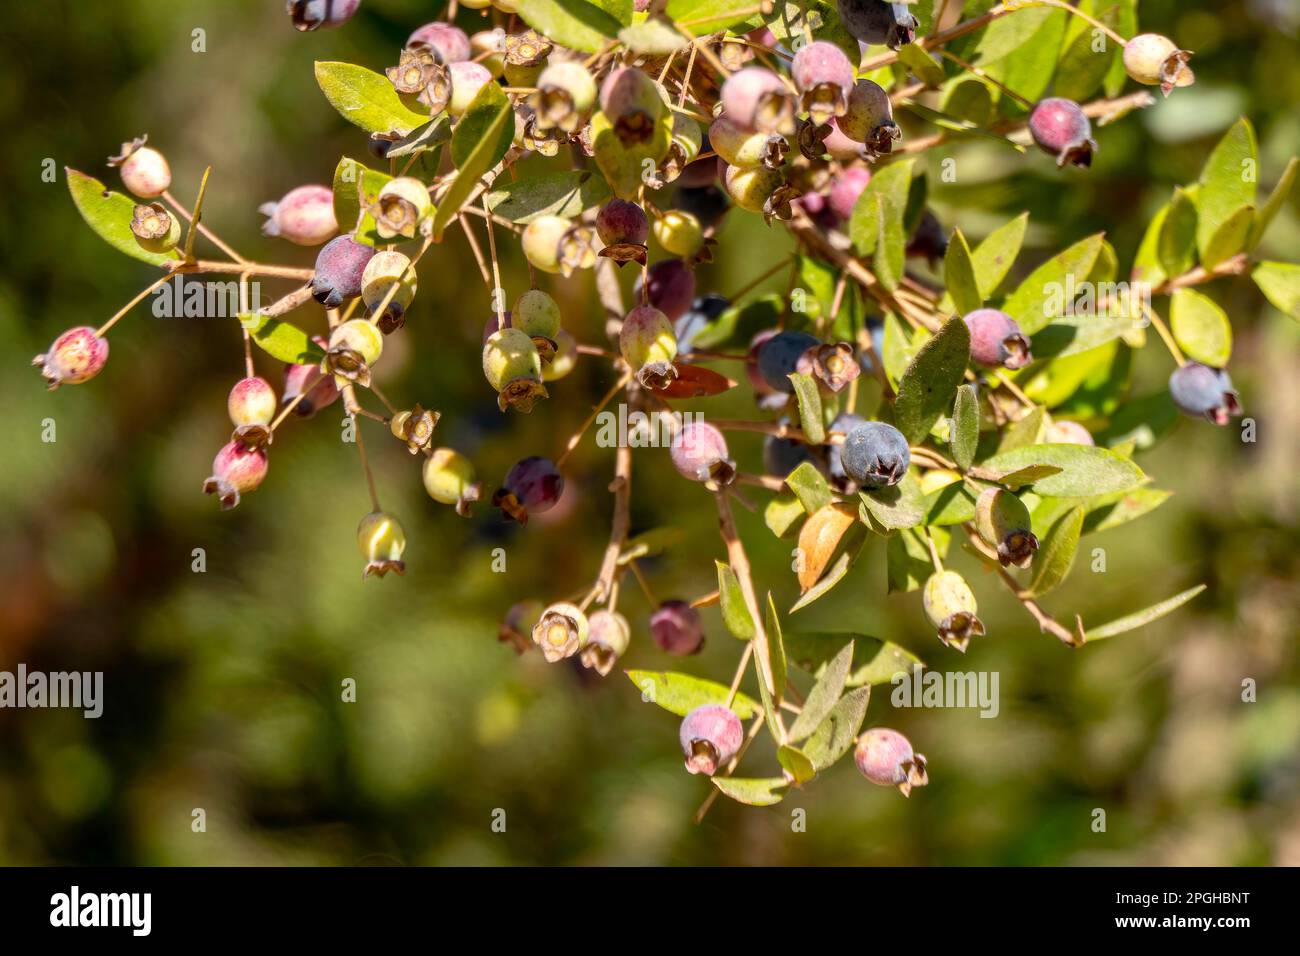 Blue Myrtus communis berries close up on the blurred background Stock Photo